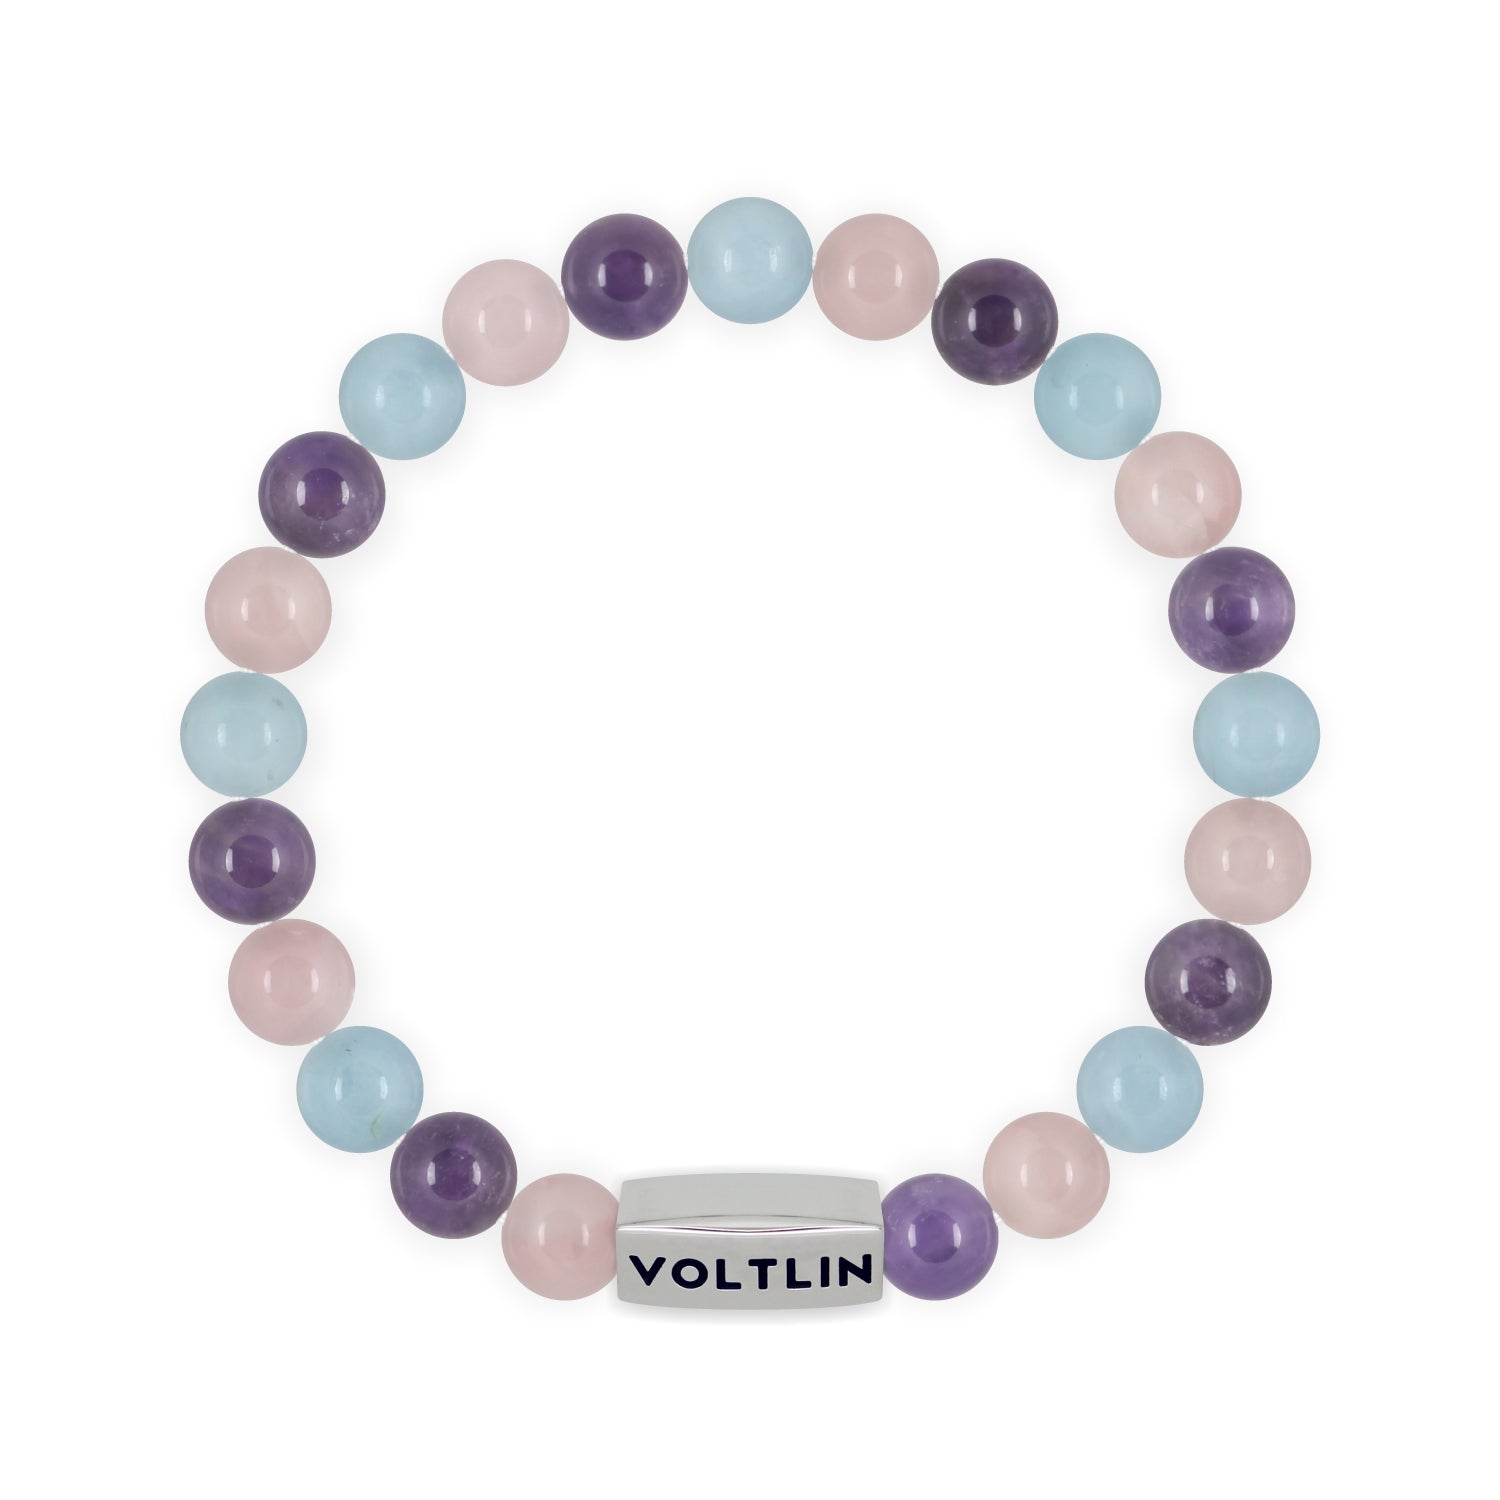 Front view of an 8mm Serenity beaded stretch bracelet featuring Rose Quartz, Amethyst, & Aquamarine crystal and silver stainless steel logo bead made by Voltlin